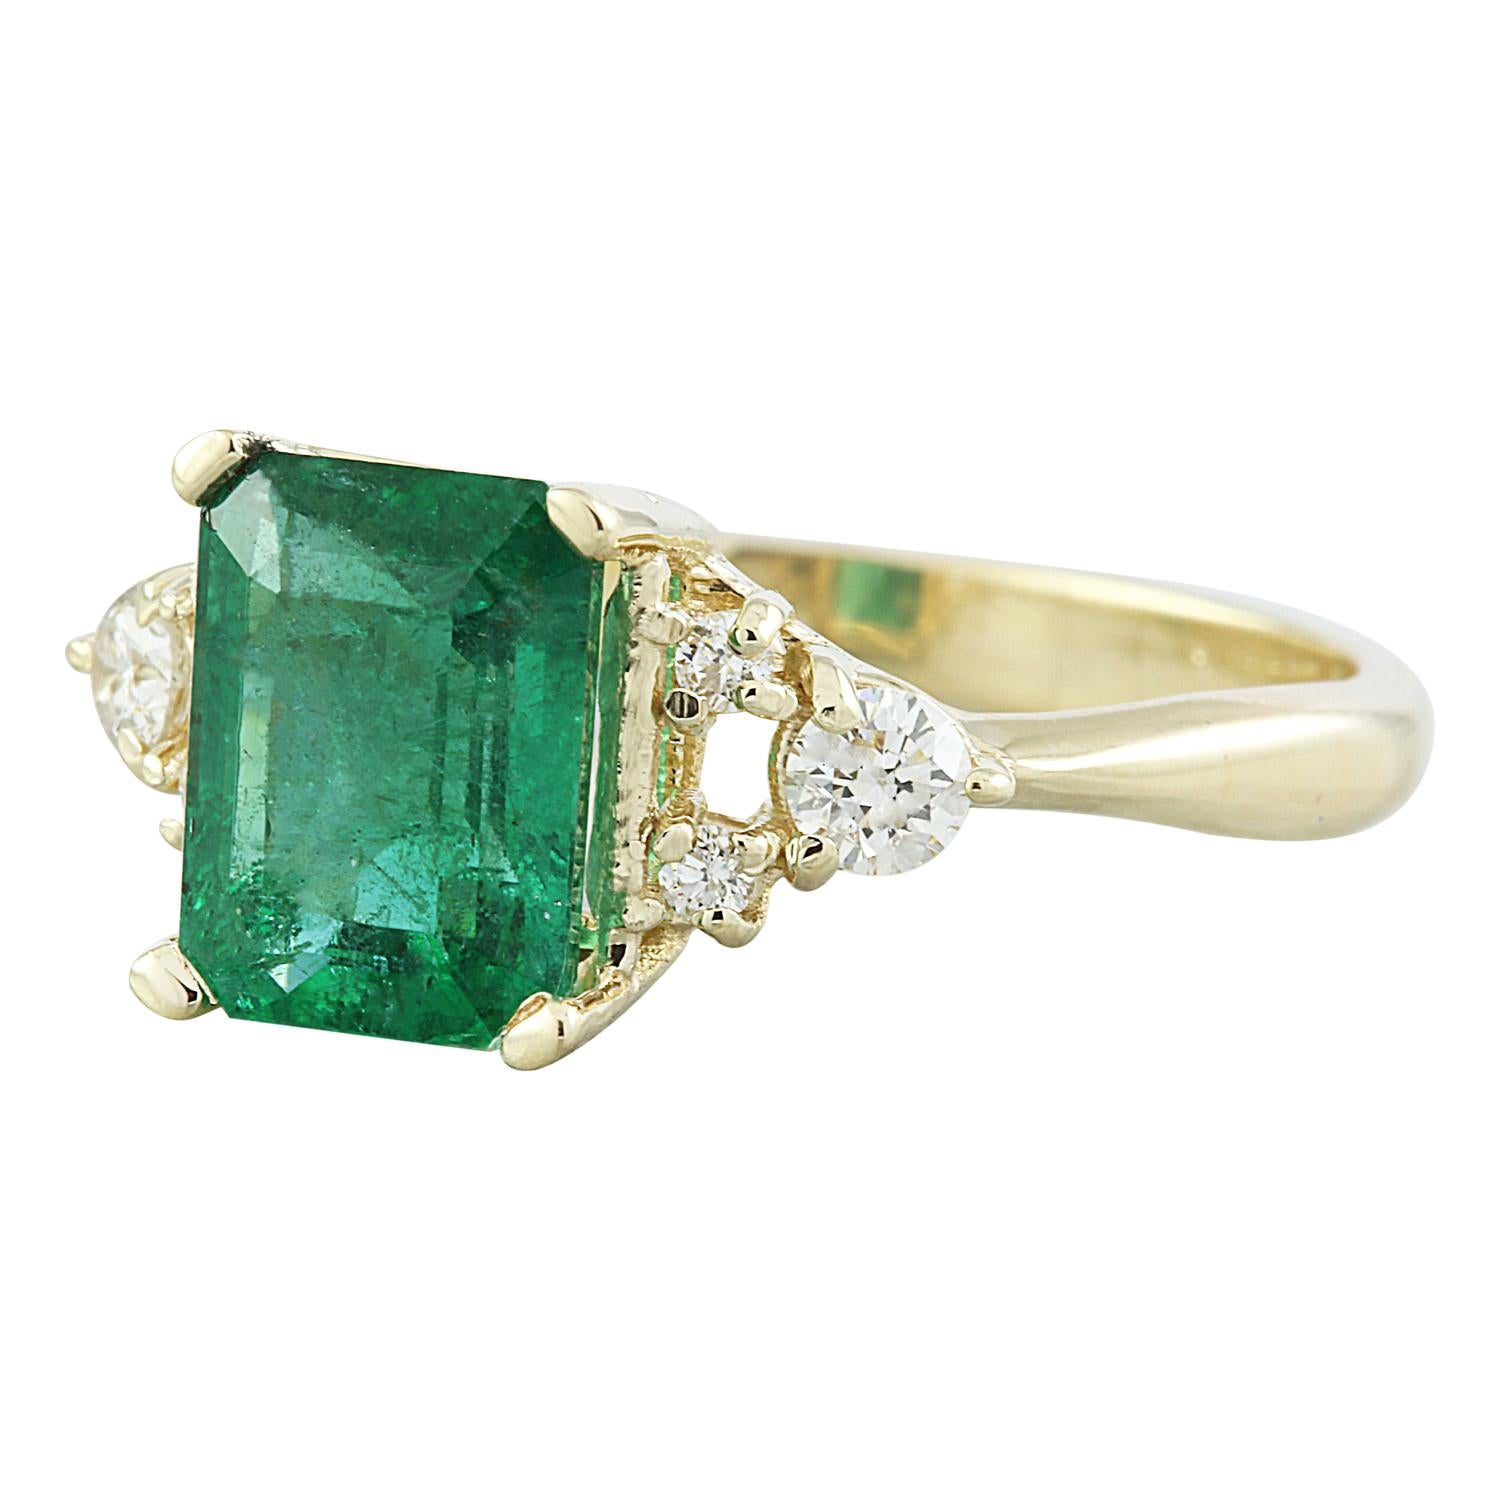 Experience the timeless allure of sophistication with this exquisite Natural Emerald Diamond Ring, crafted in solid 14K Yellow Gold. Weighing a total of 2.23 carats, this ring is a testament to refined taste and understated elegance.

At its heart